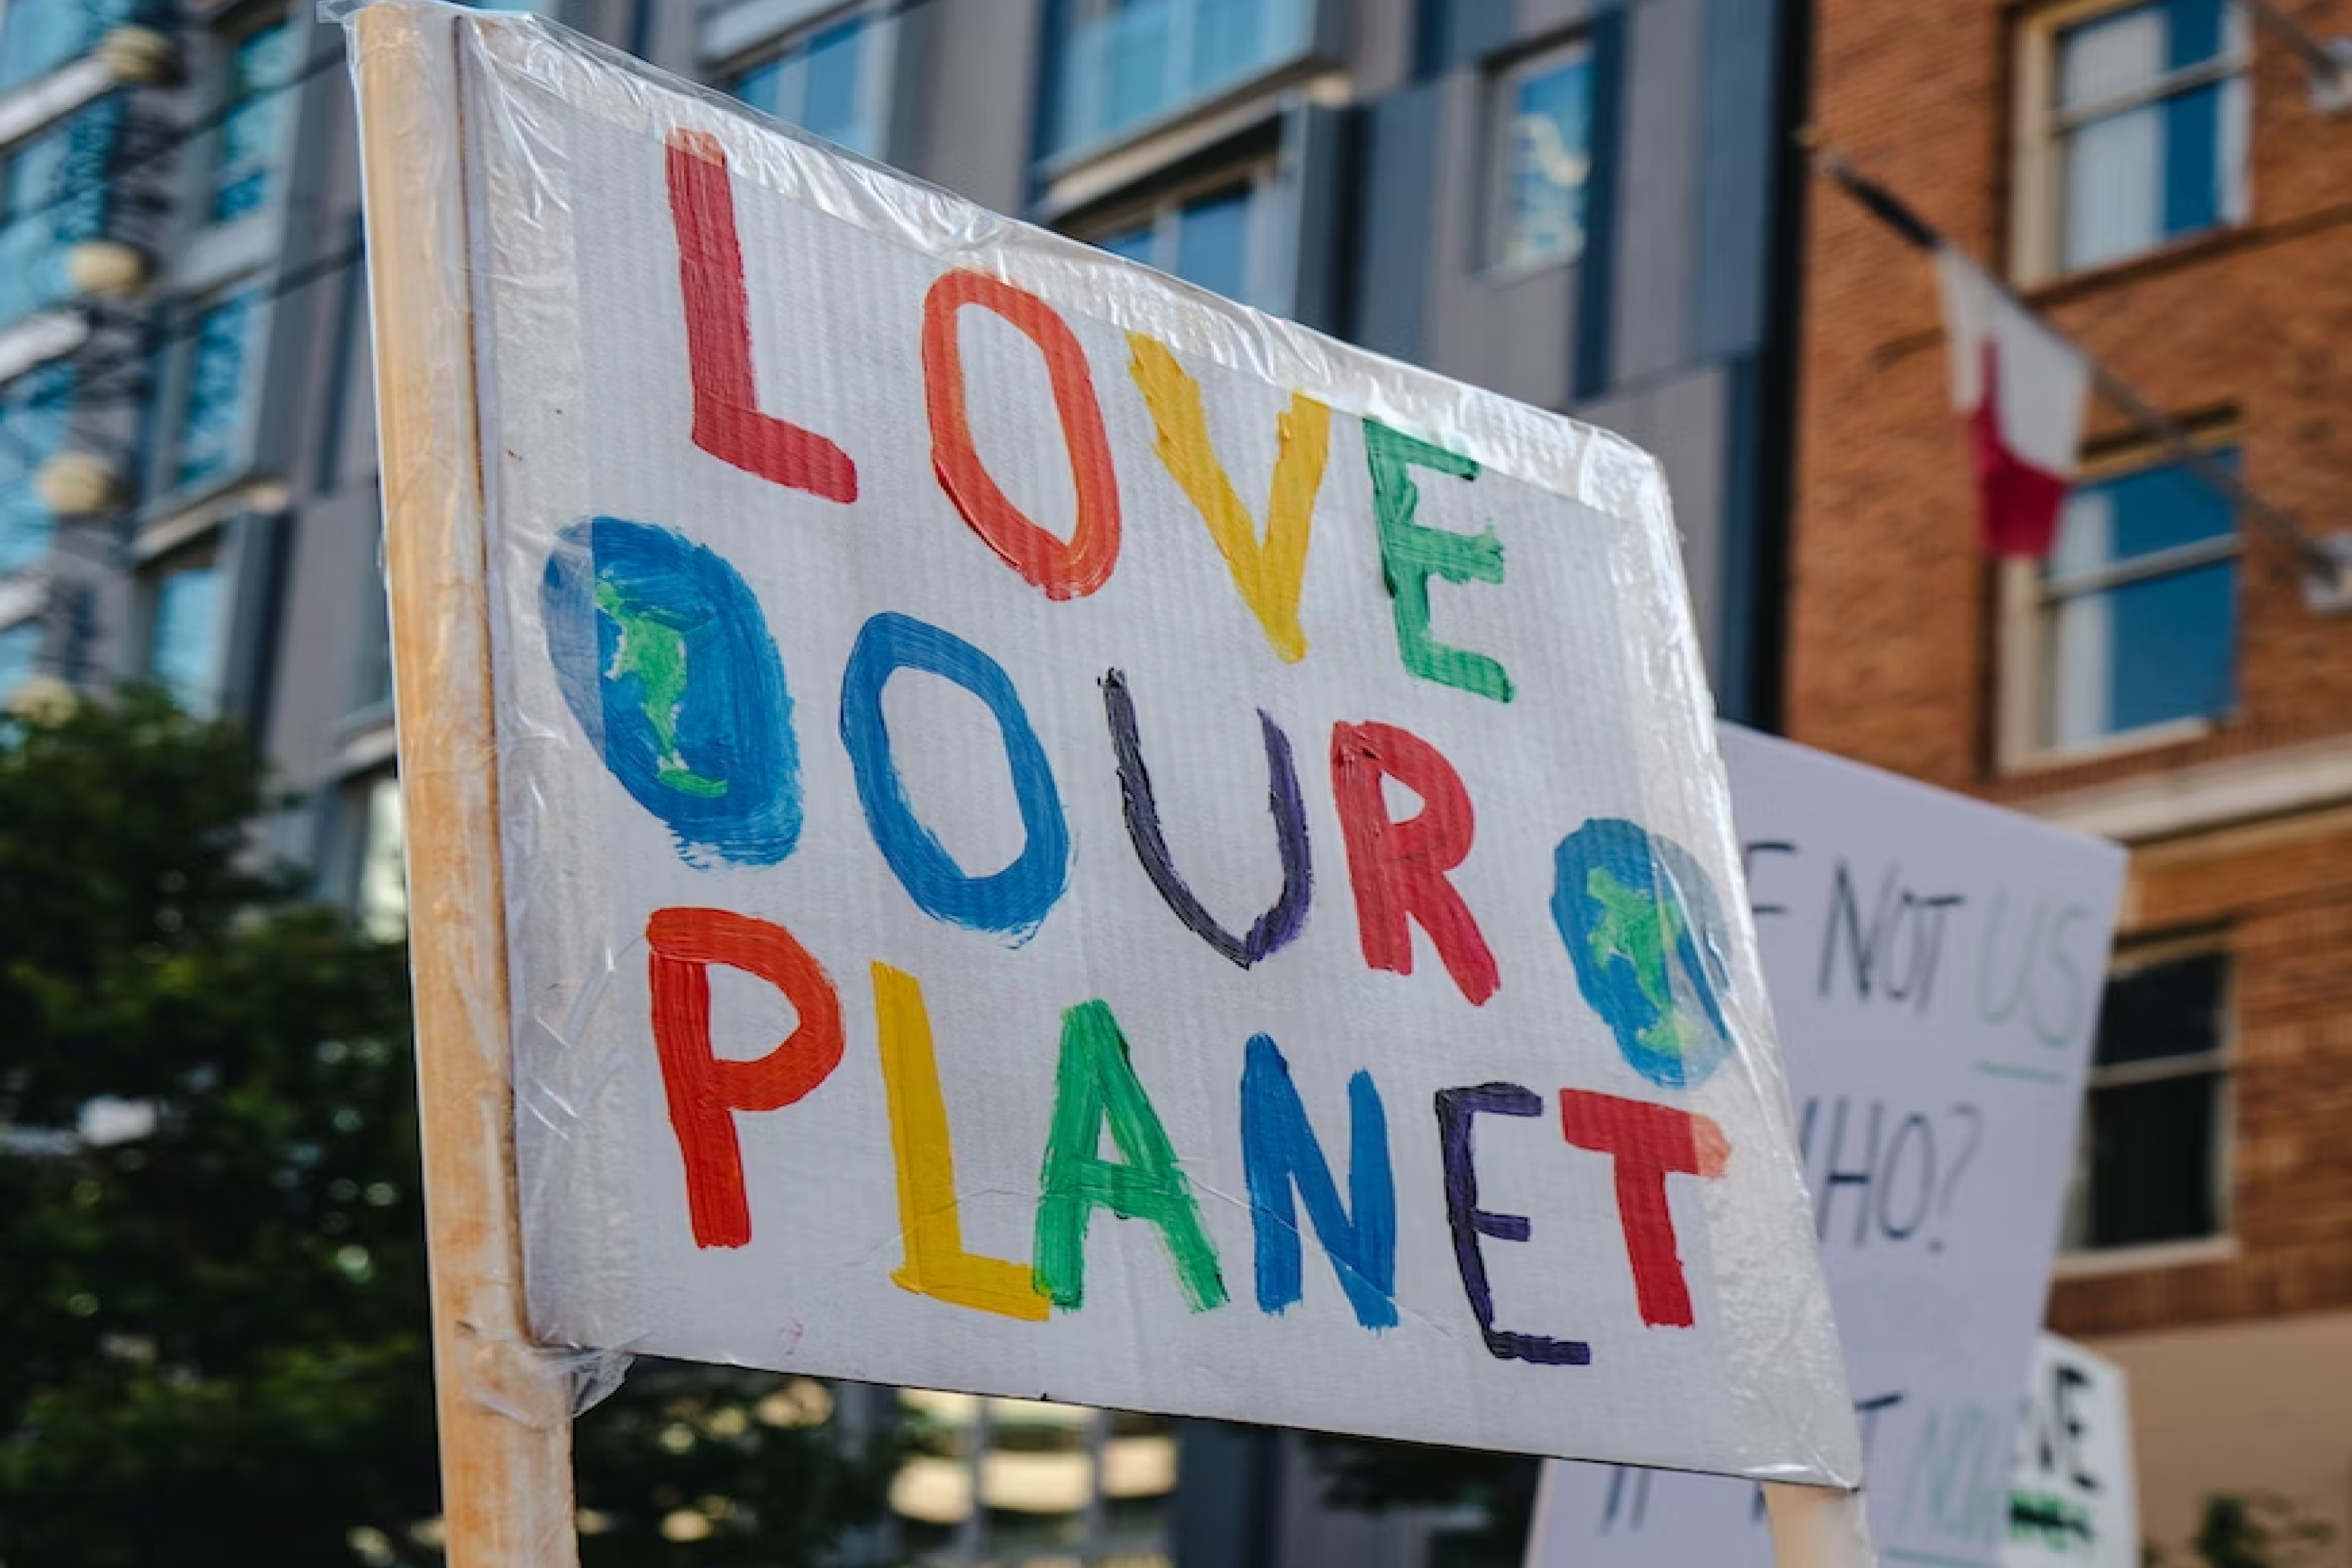 Love our planet on poster